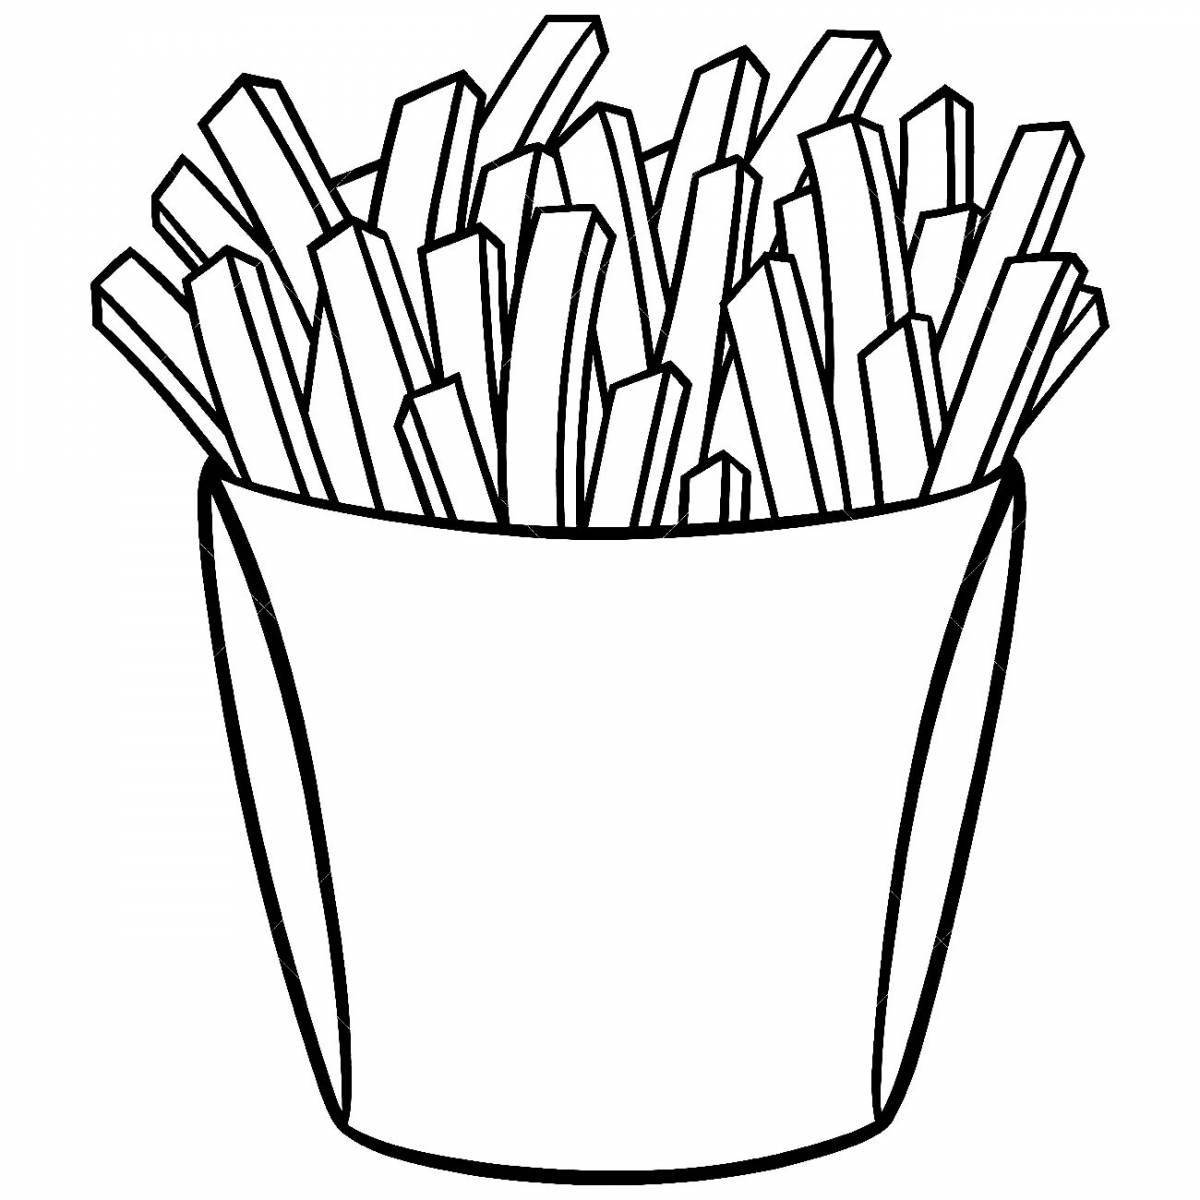 Delightful french fries coloring book for kids